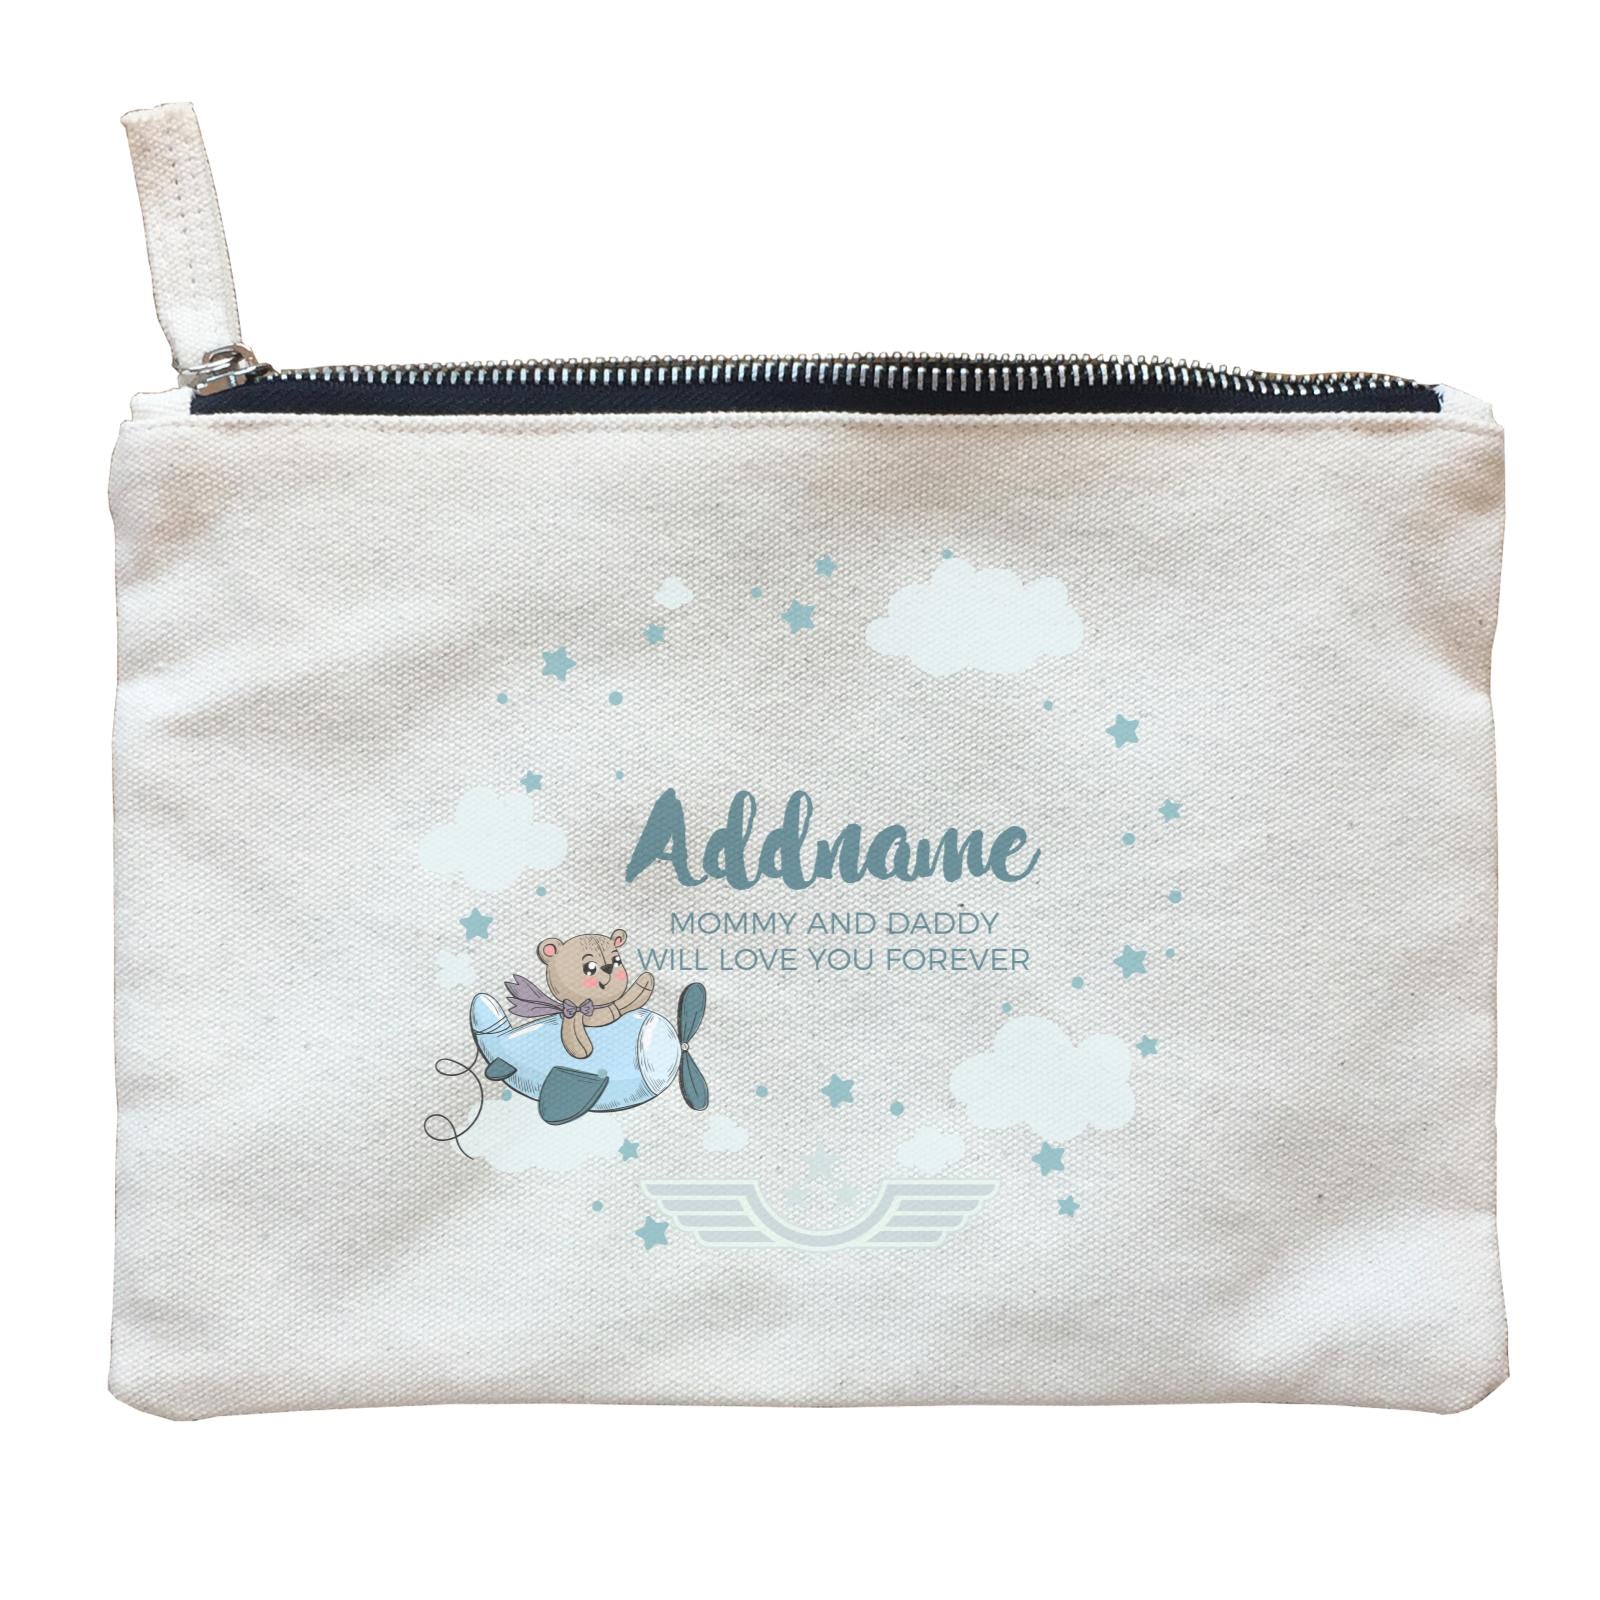 Cute Bear Pilot in Blue Plane Clouds and Stars Element Personalizable with Name and Text Zipper Pouch